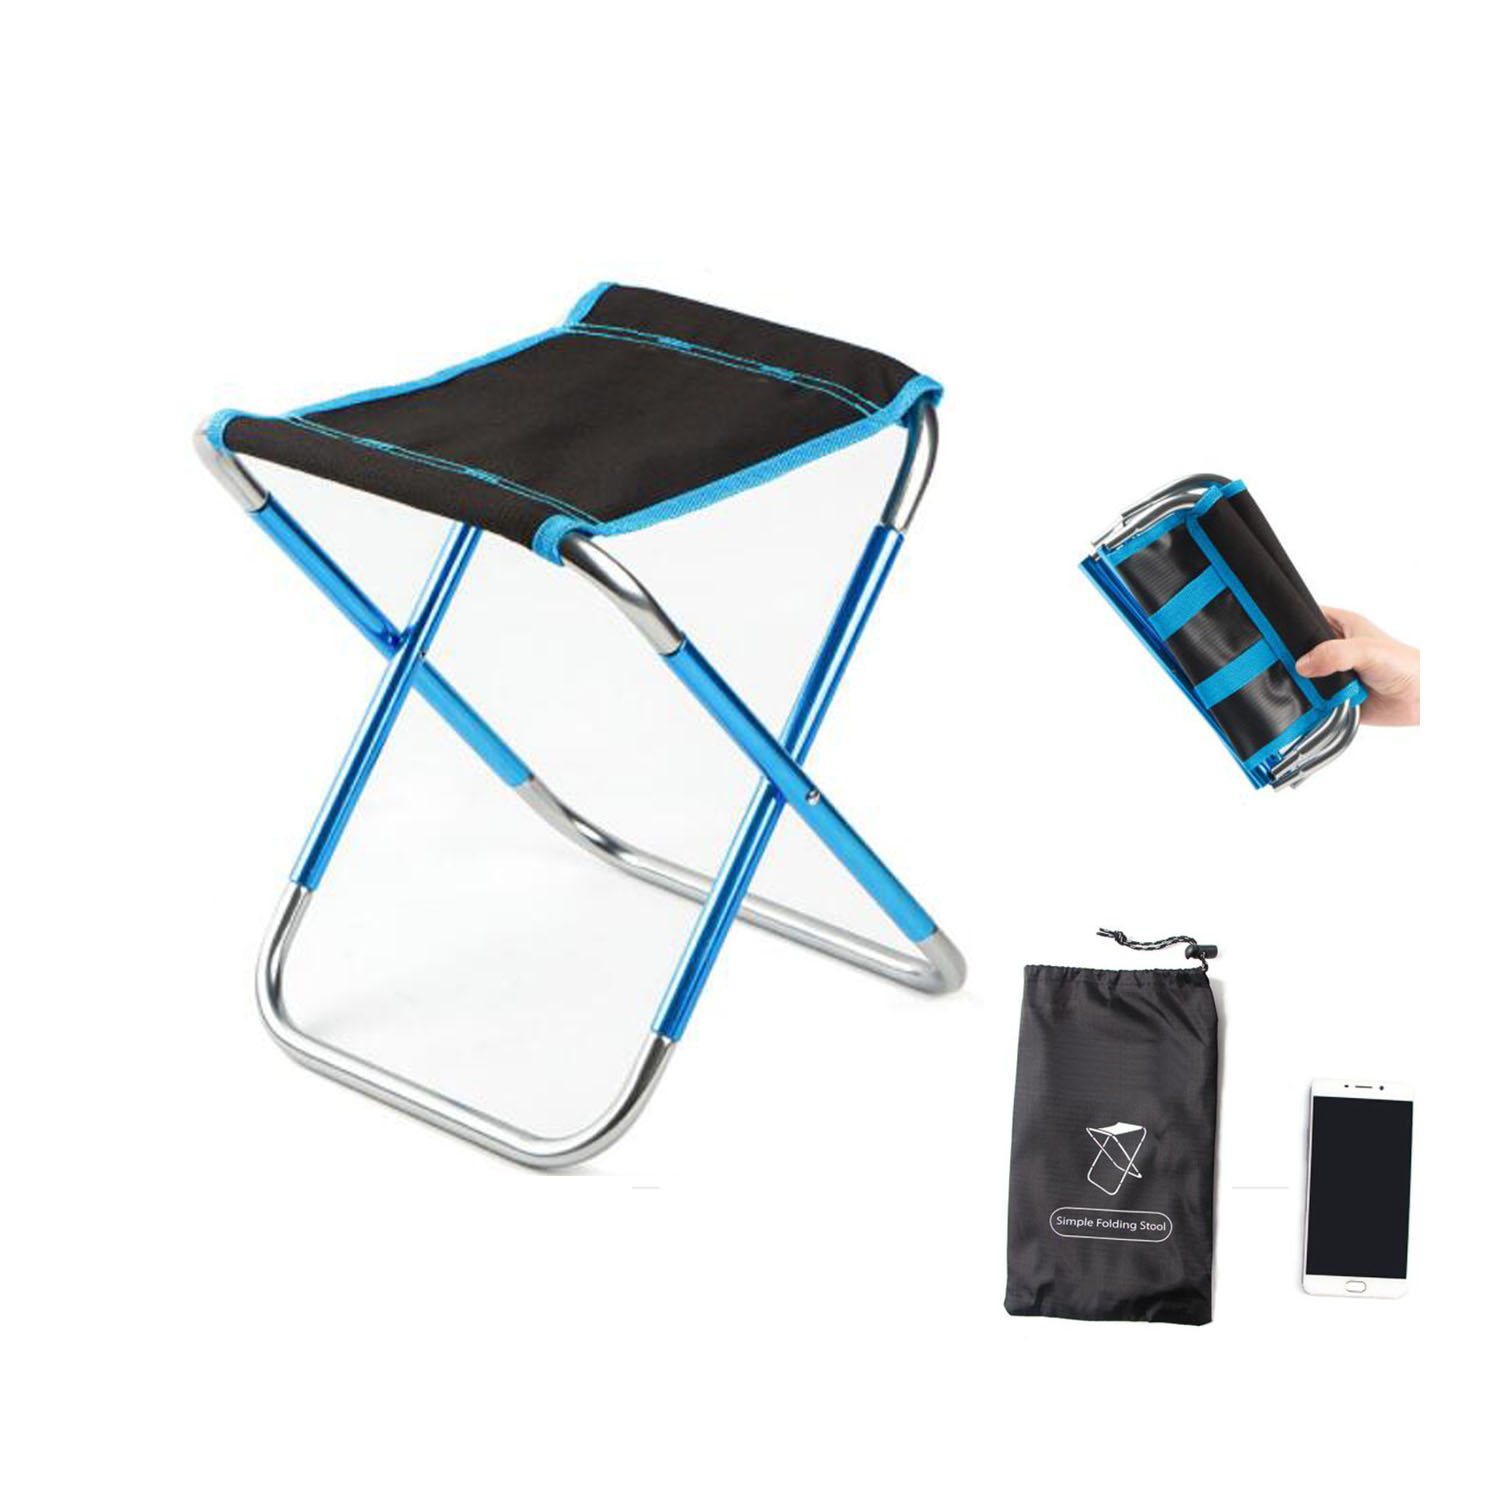 GL-AAA1288 Aluminum Alloy Folding Camping Chair with Carrying Bag